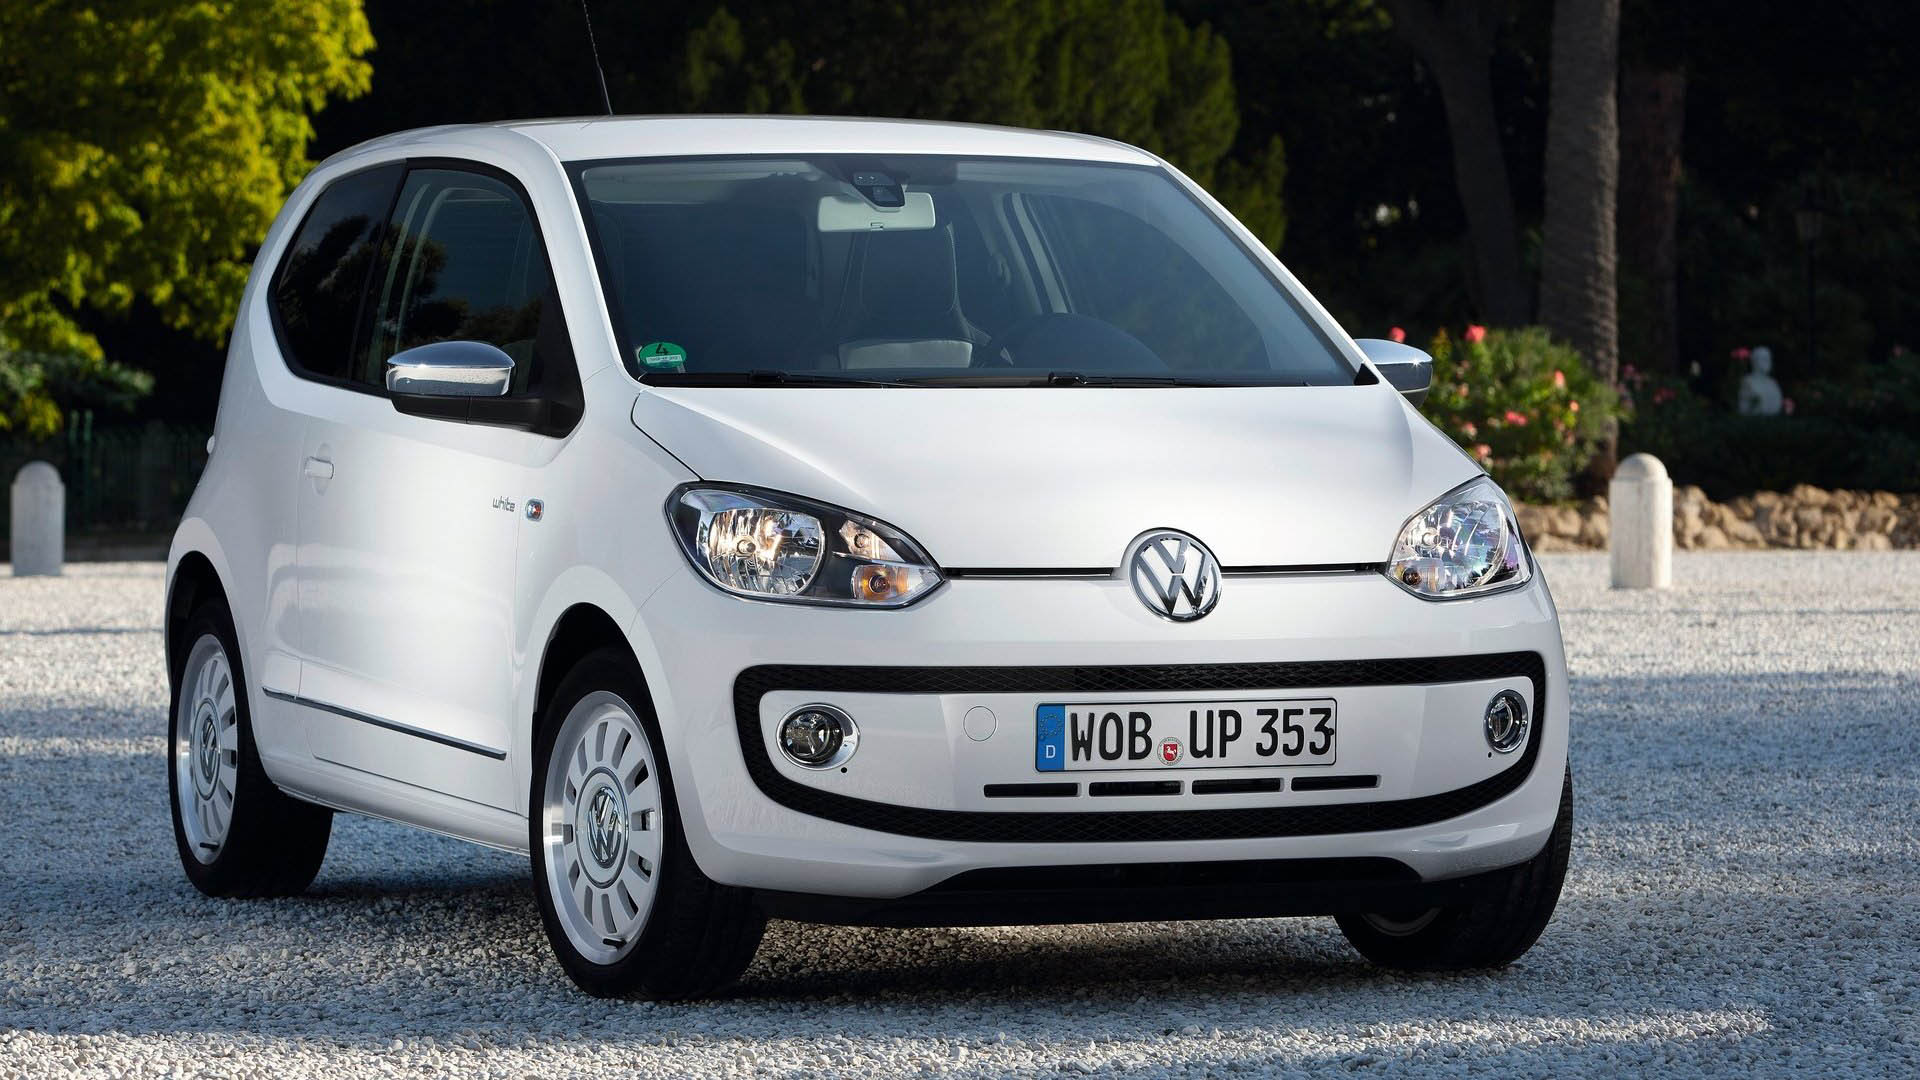 Volkswagen up 2013: Review, Amazing Pictures and Images – Look at the car